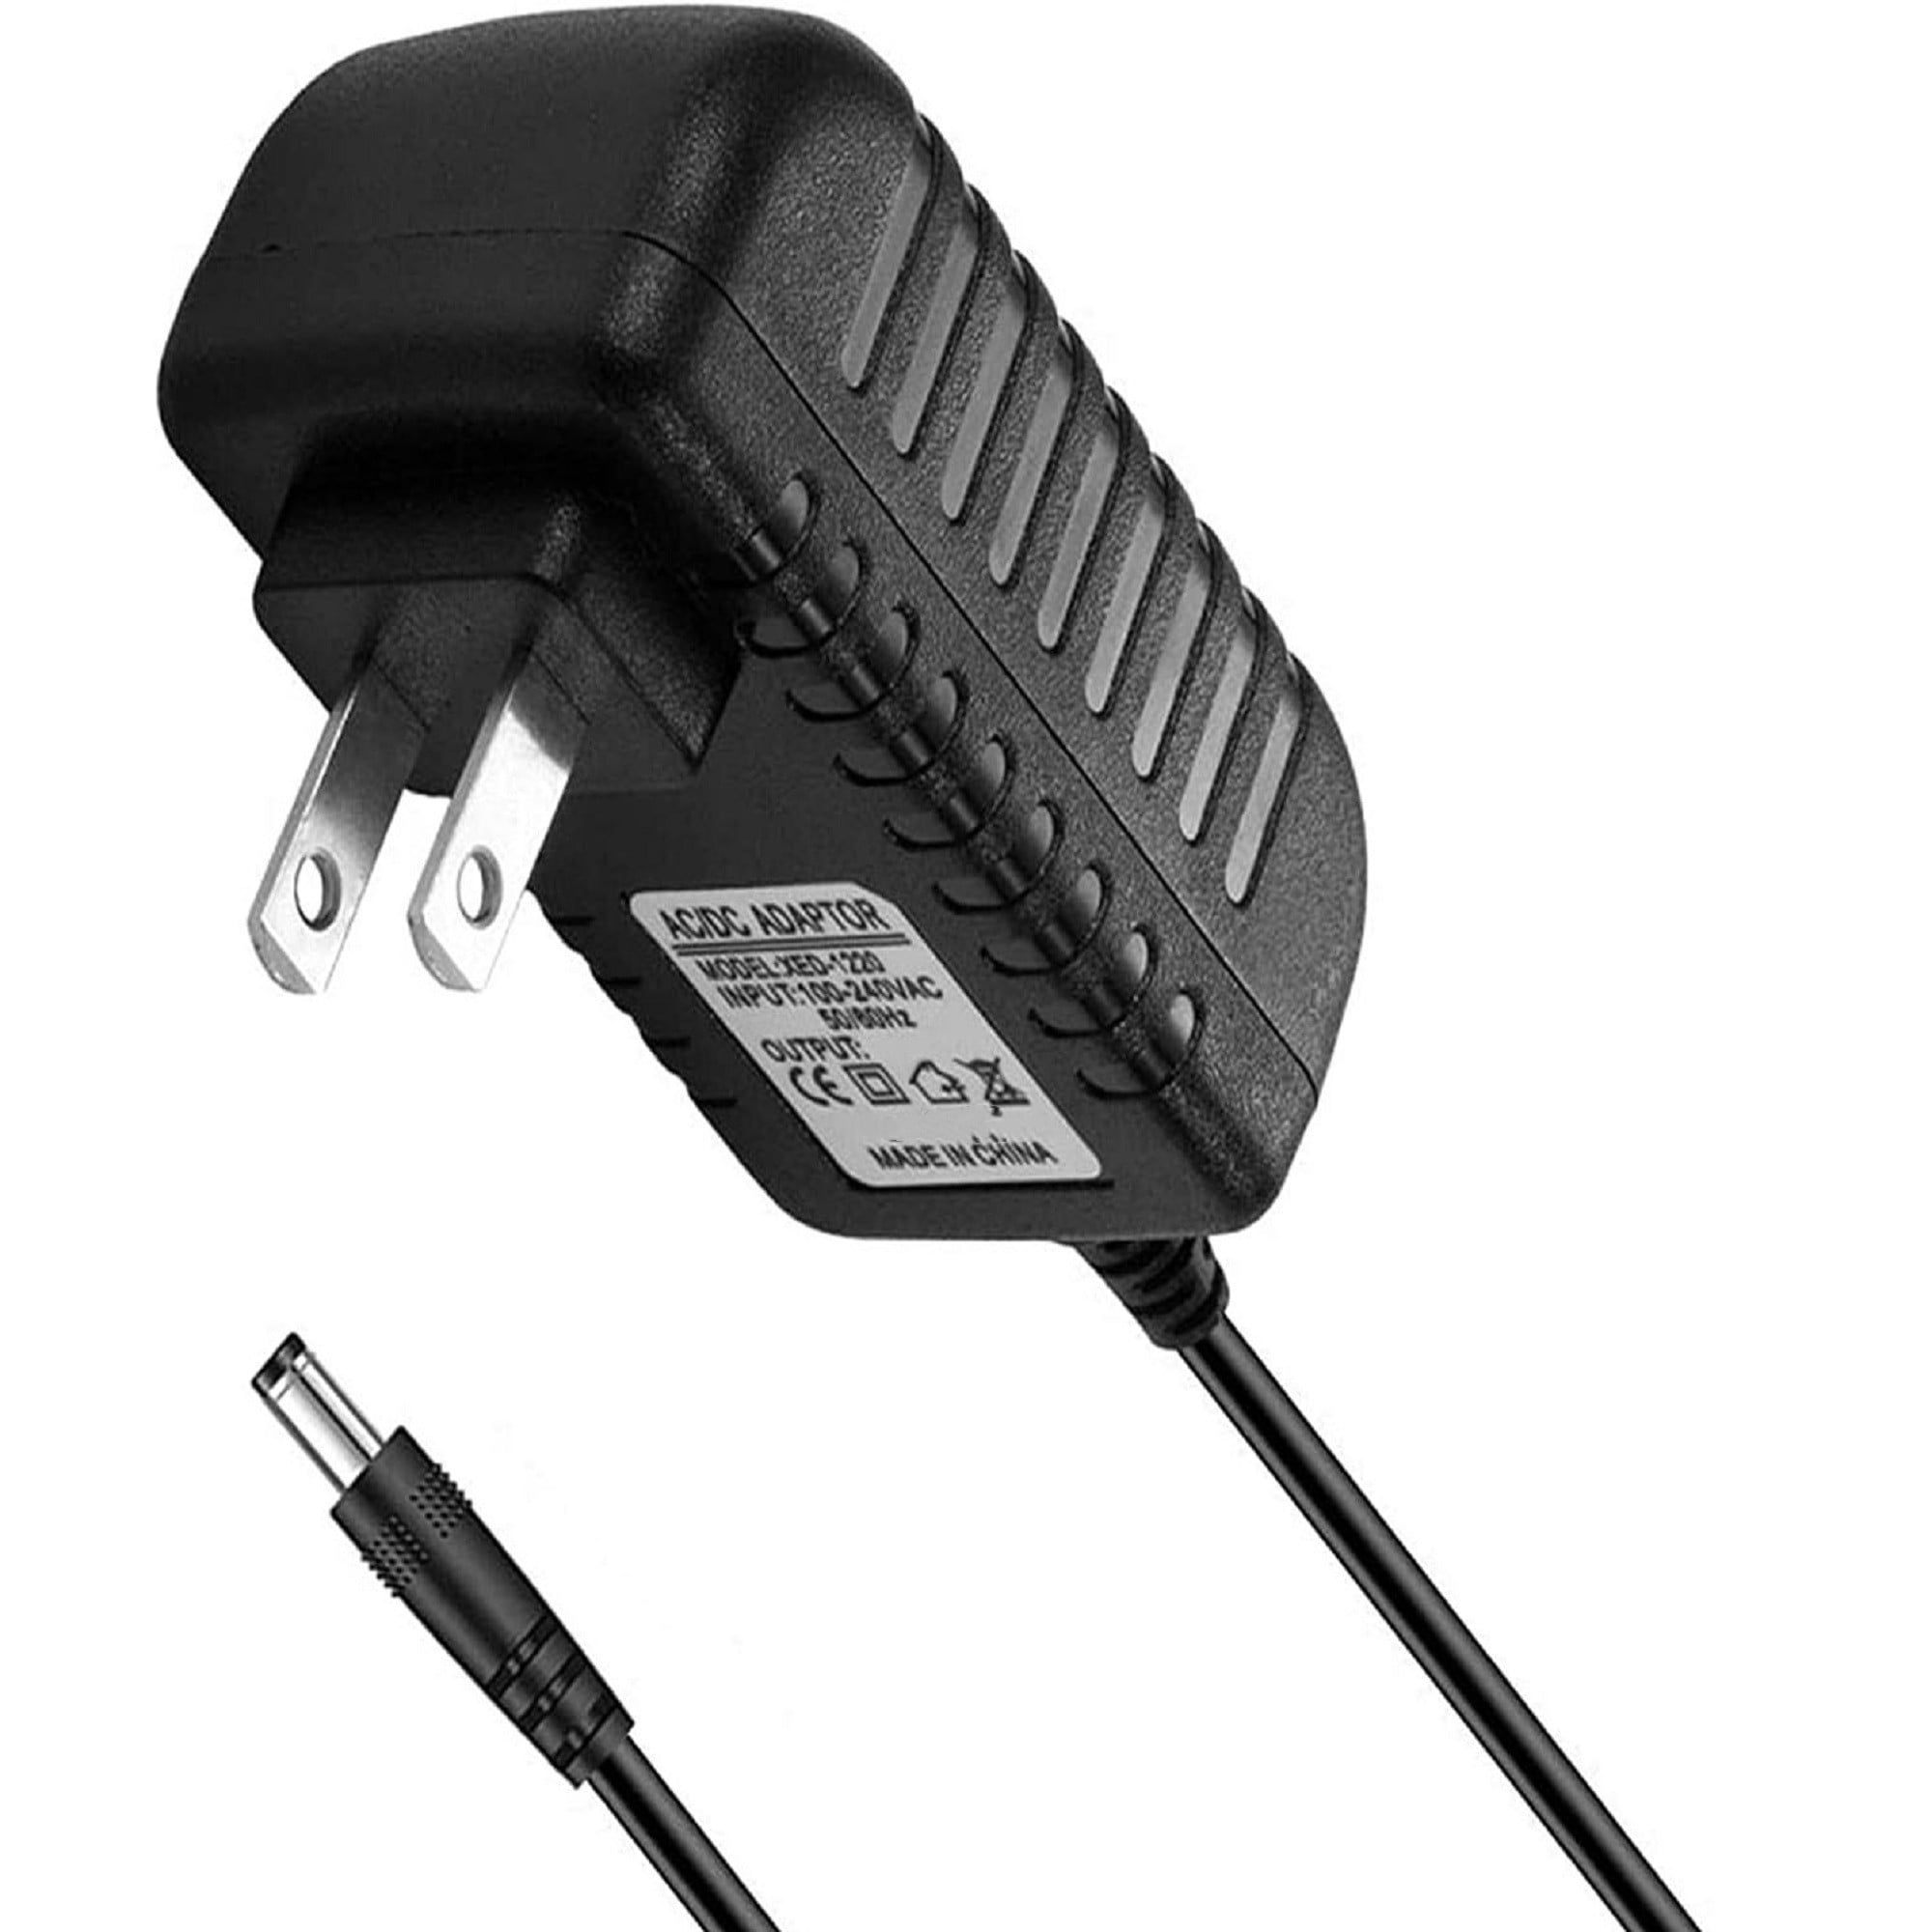 K-MAINS Compatible AC Adapter replacement for Ryobi SA721 7.2V 3/8 In Cordless Drill Charger Power Walmart.com